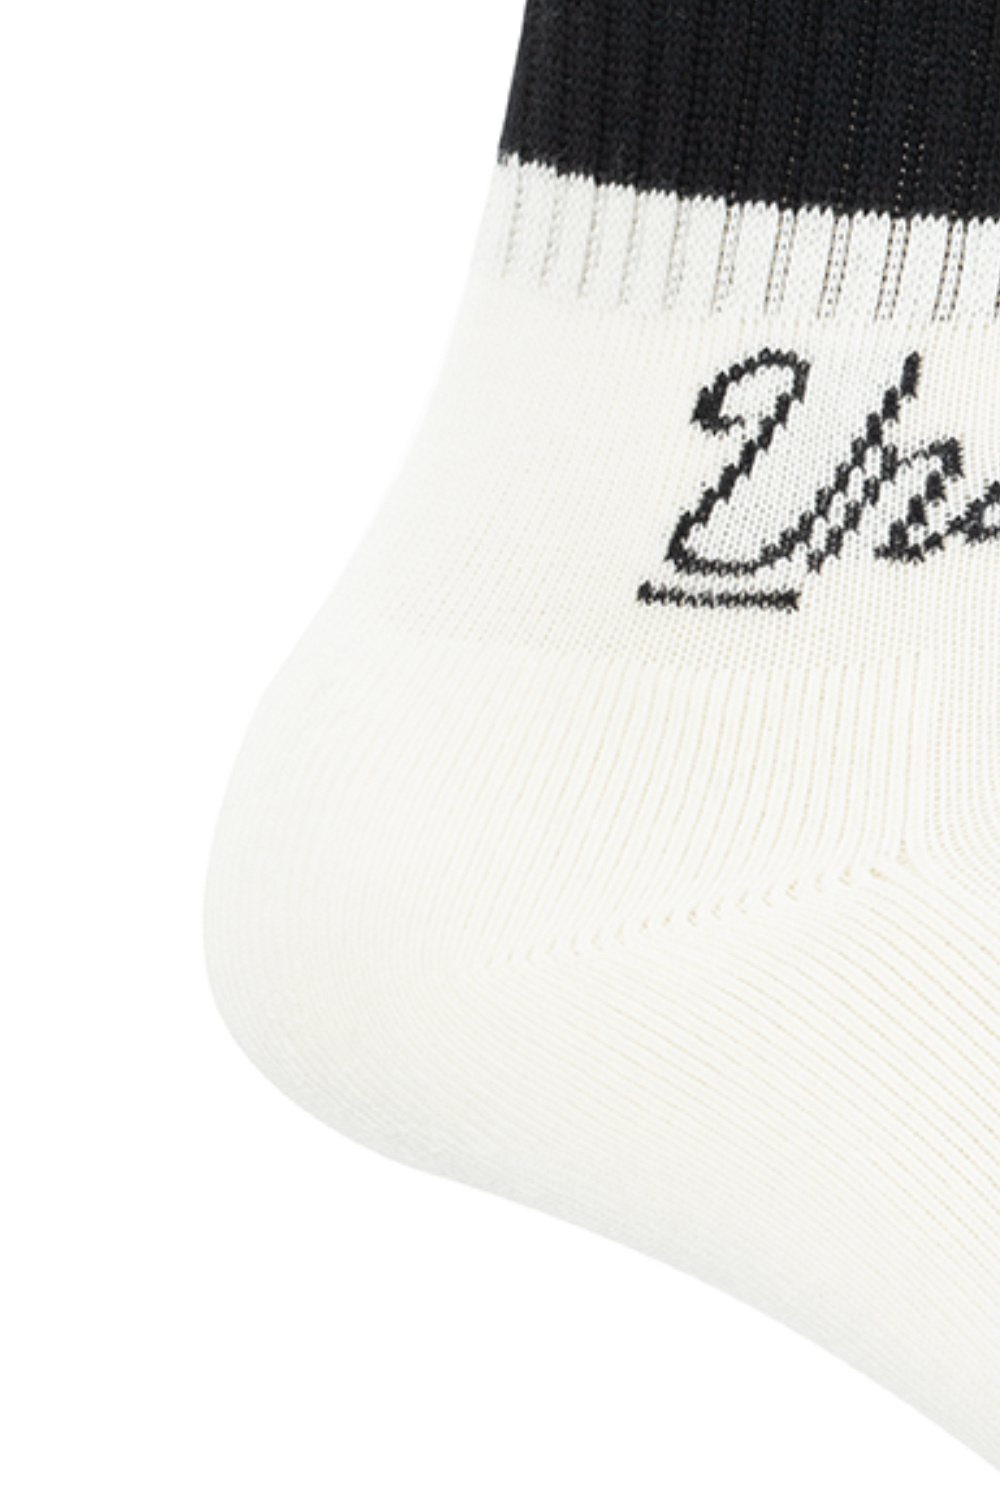 Undercover Socks with logo